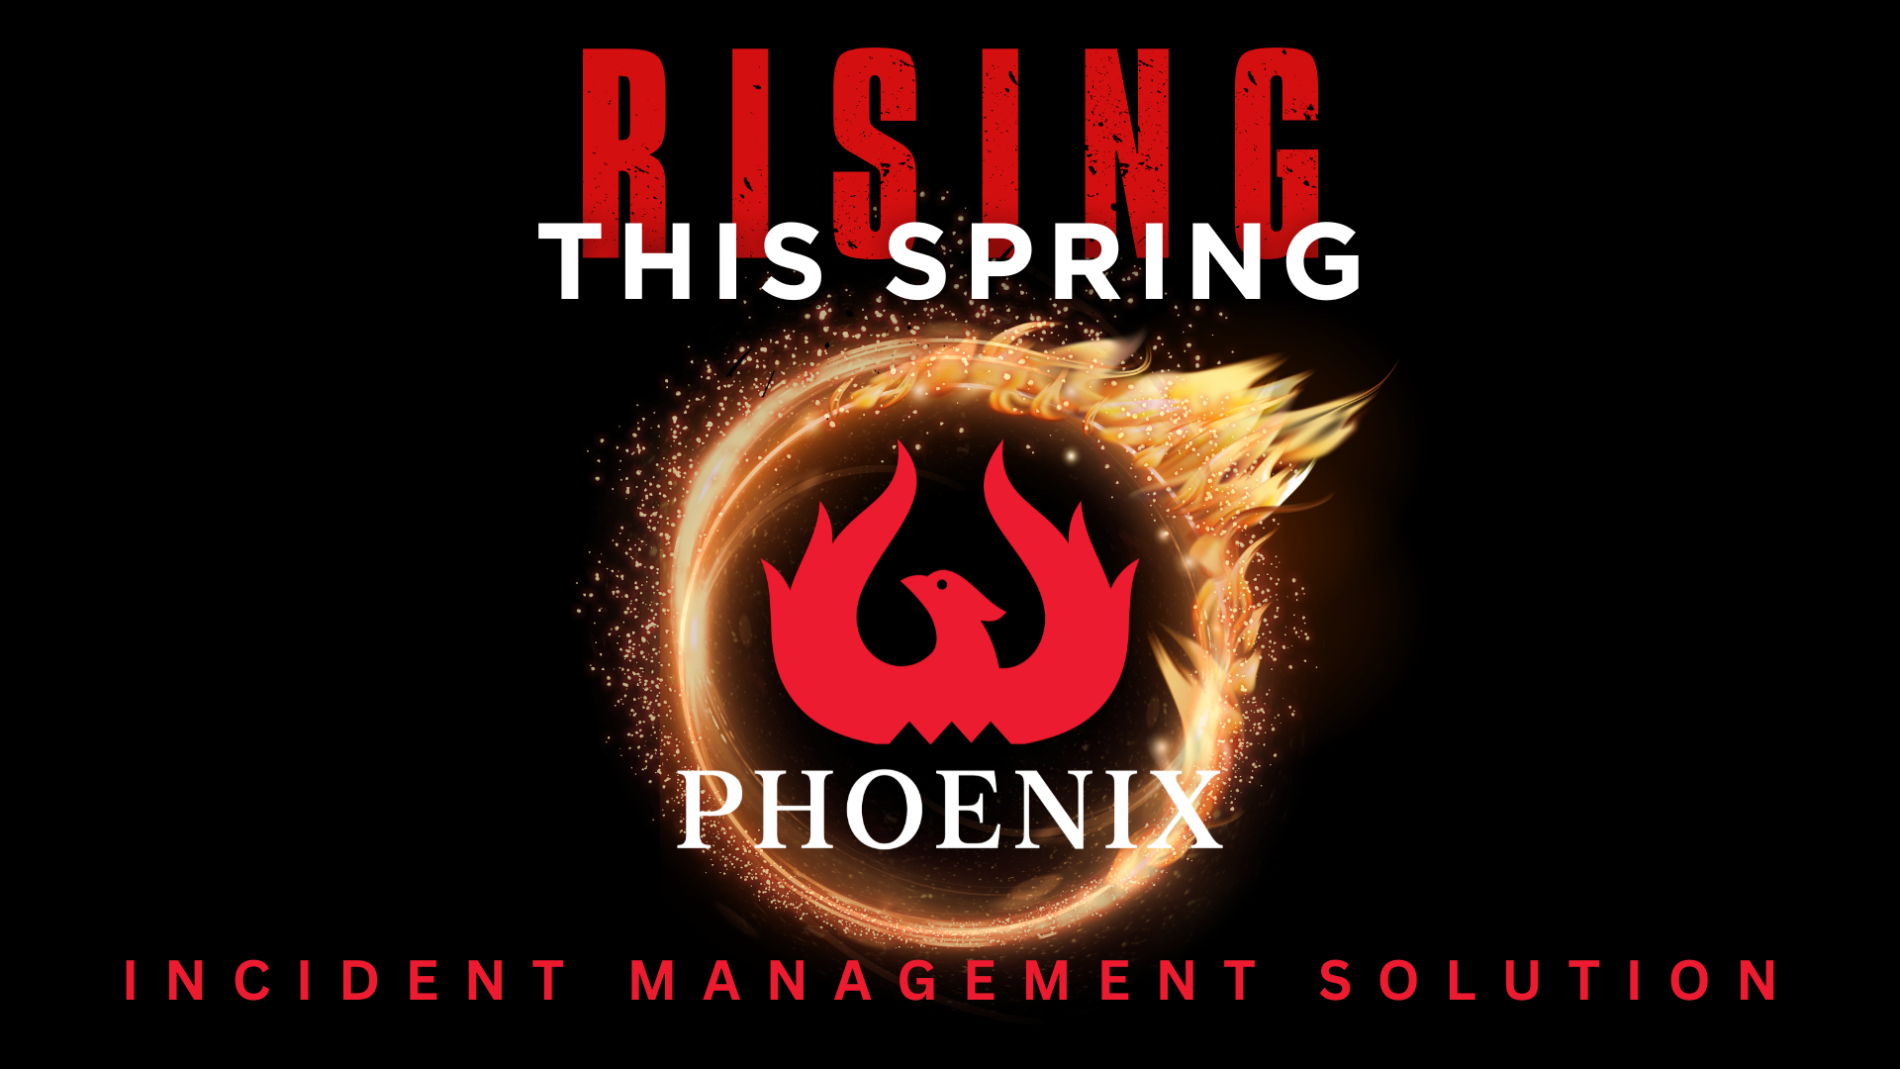 Phoenix logo with a ring of fire around it and the text: "Rising this spring. Phoenix. Incident Management Solution."